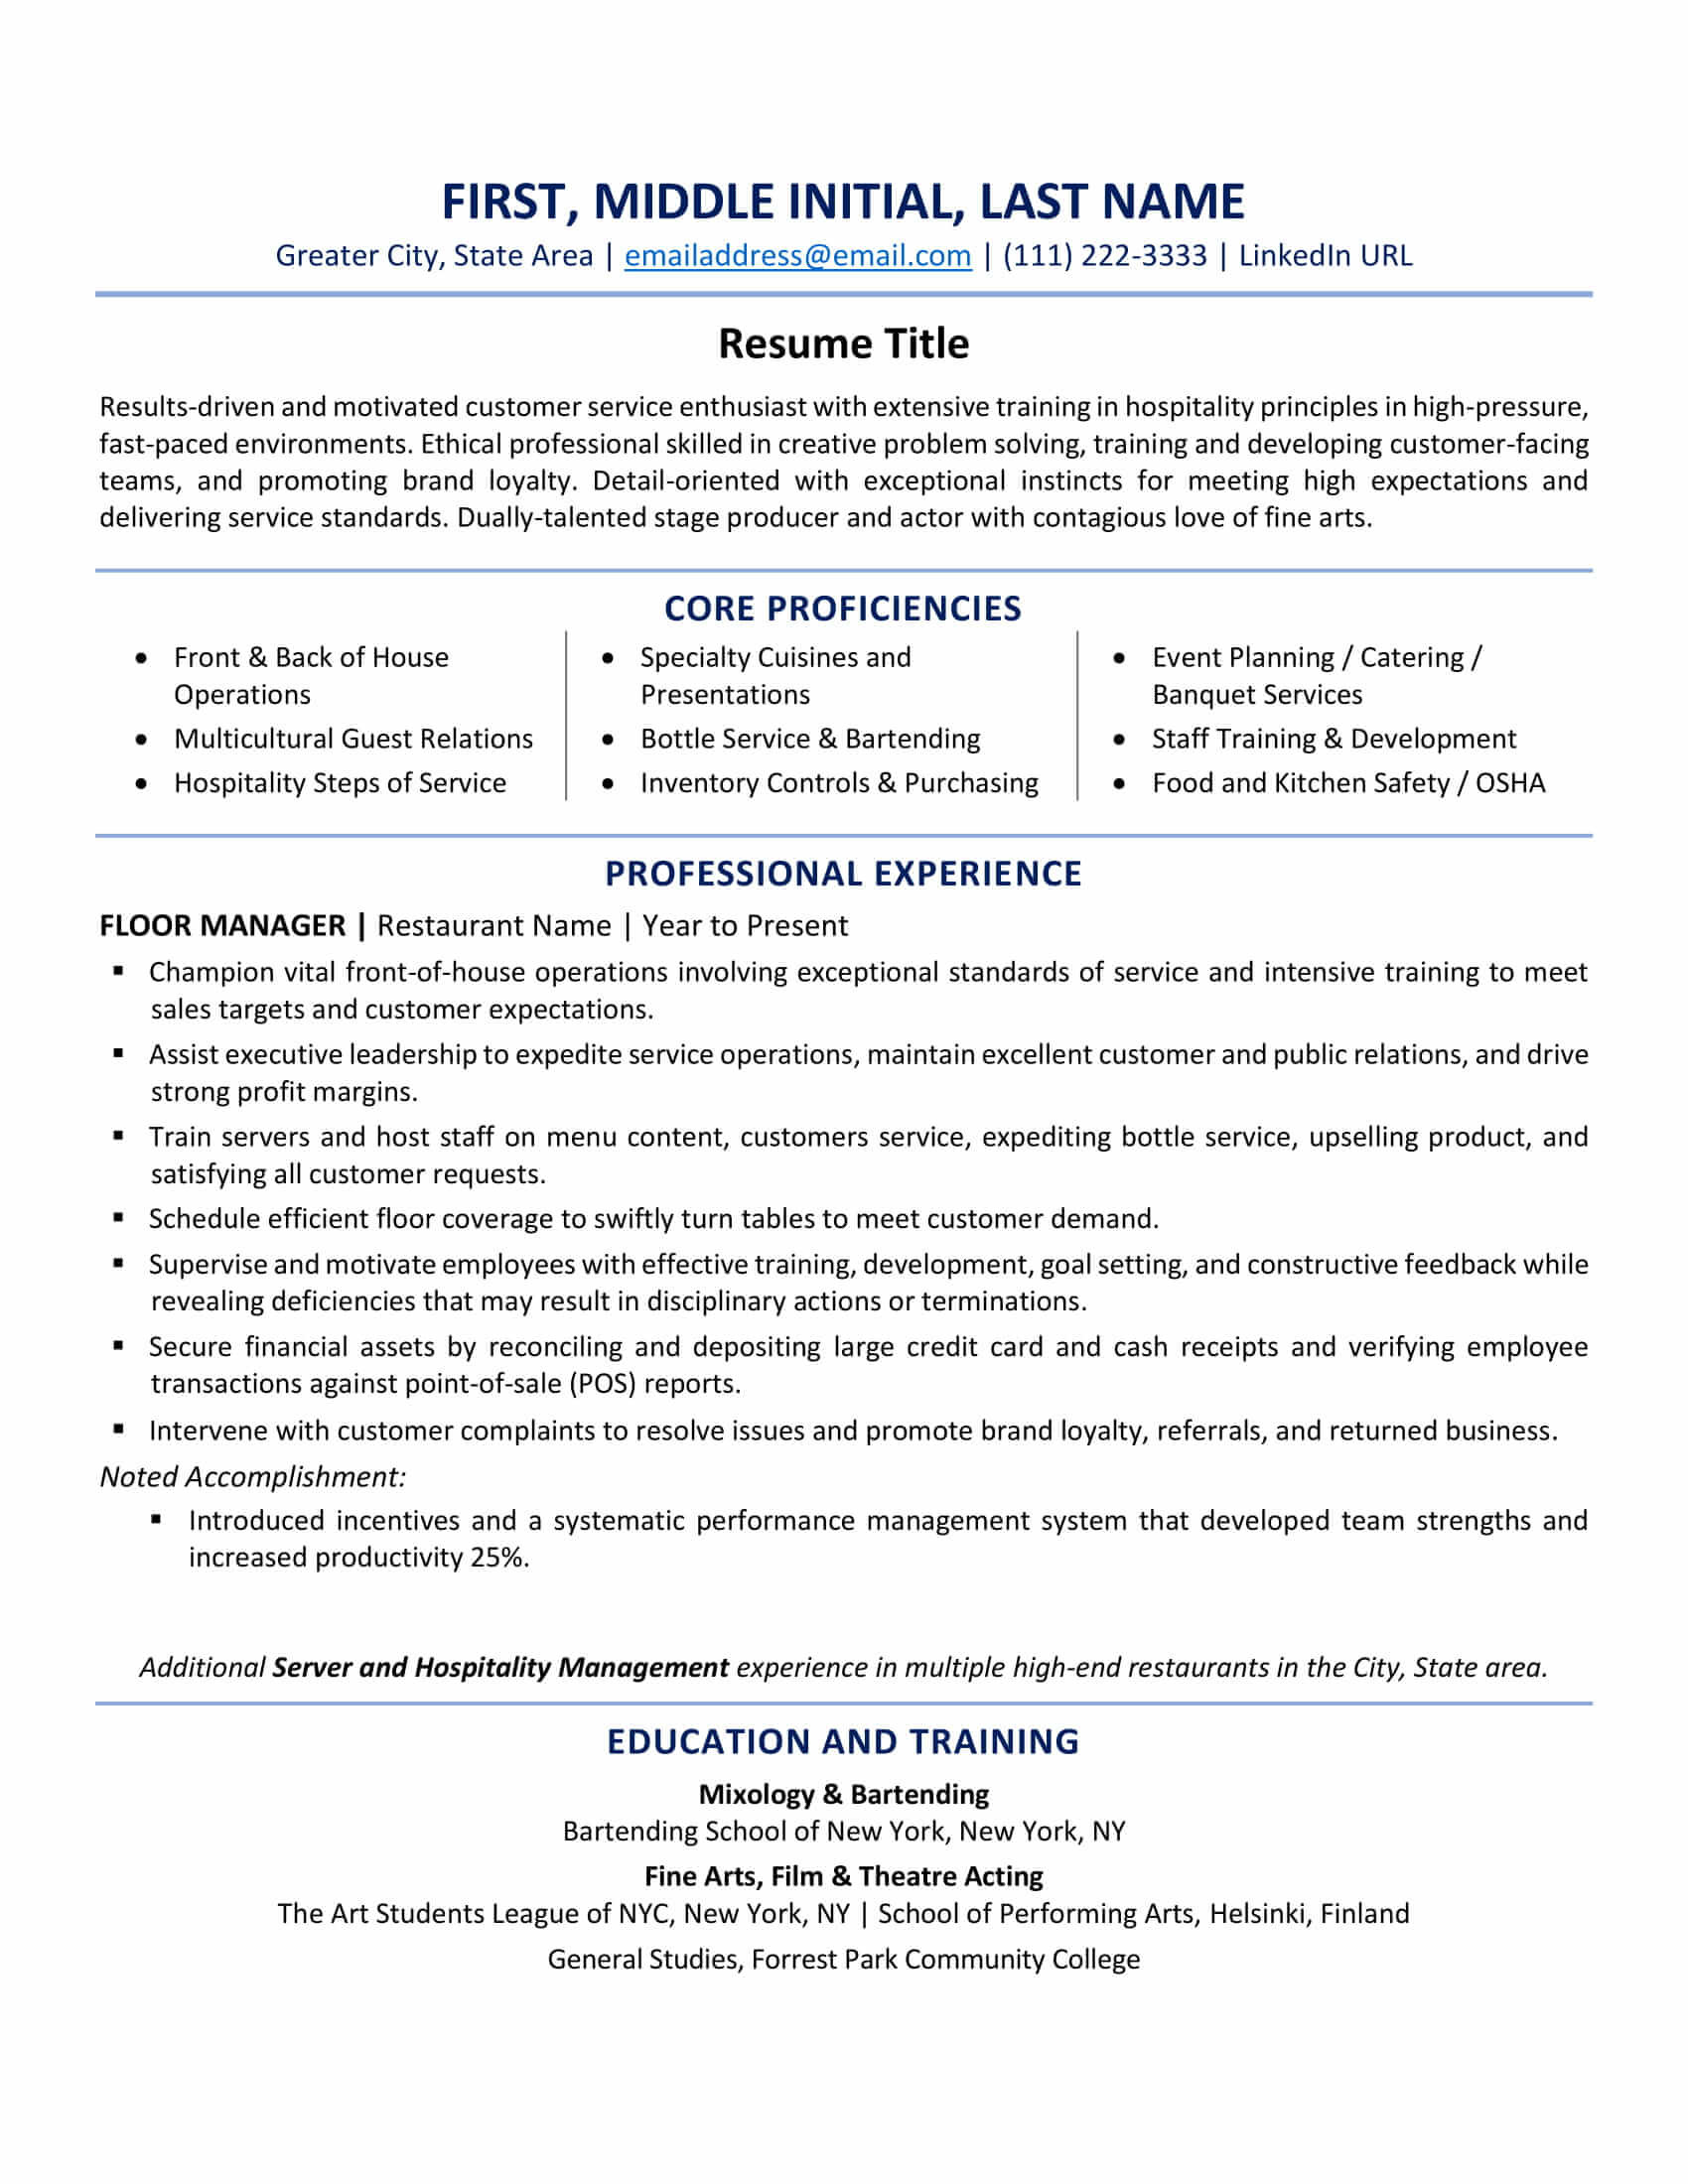 Resume Template for Returning to Work 7 No-fail Resume Tips for Older Workers (lancarrezekiq Examples) Zipjob